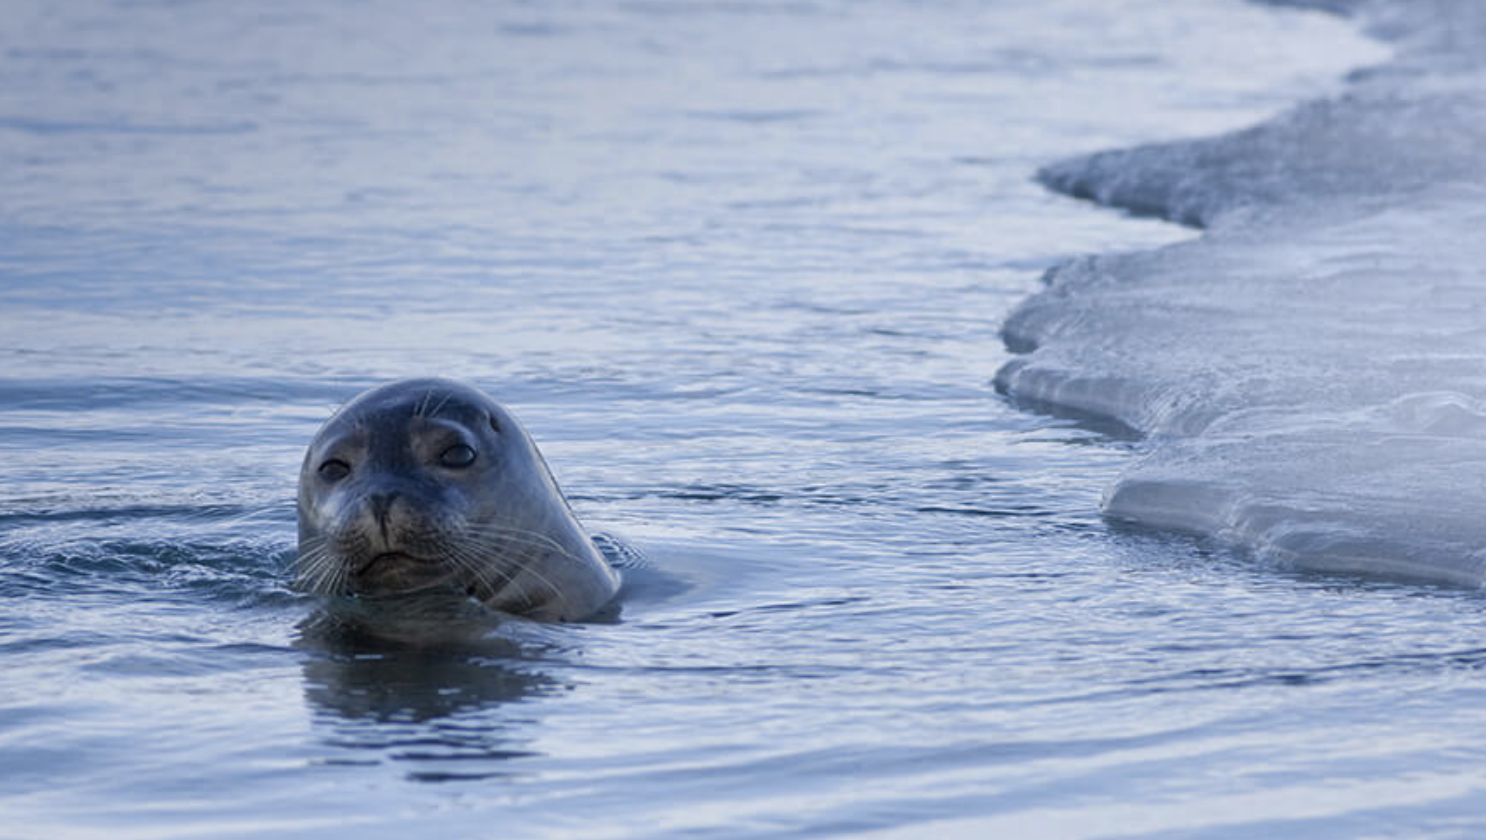 The Glacier Lagoon is one of the best spots in Iceland to see seals